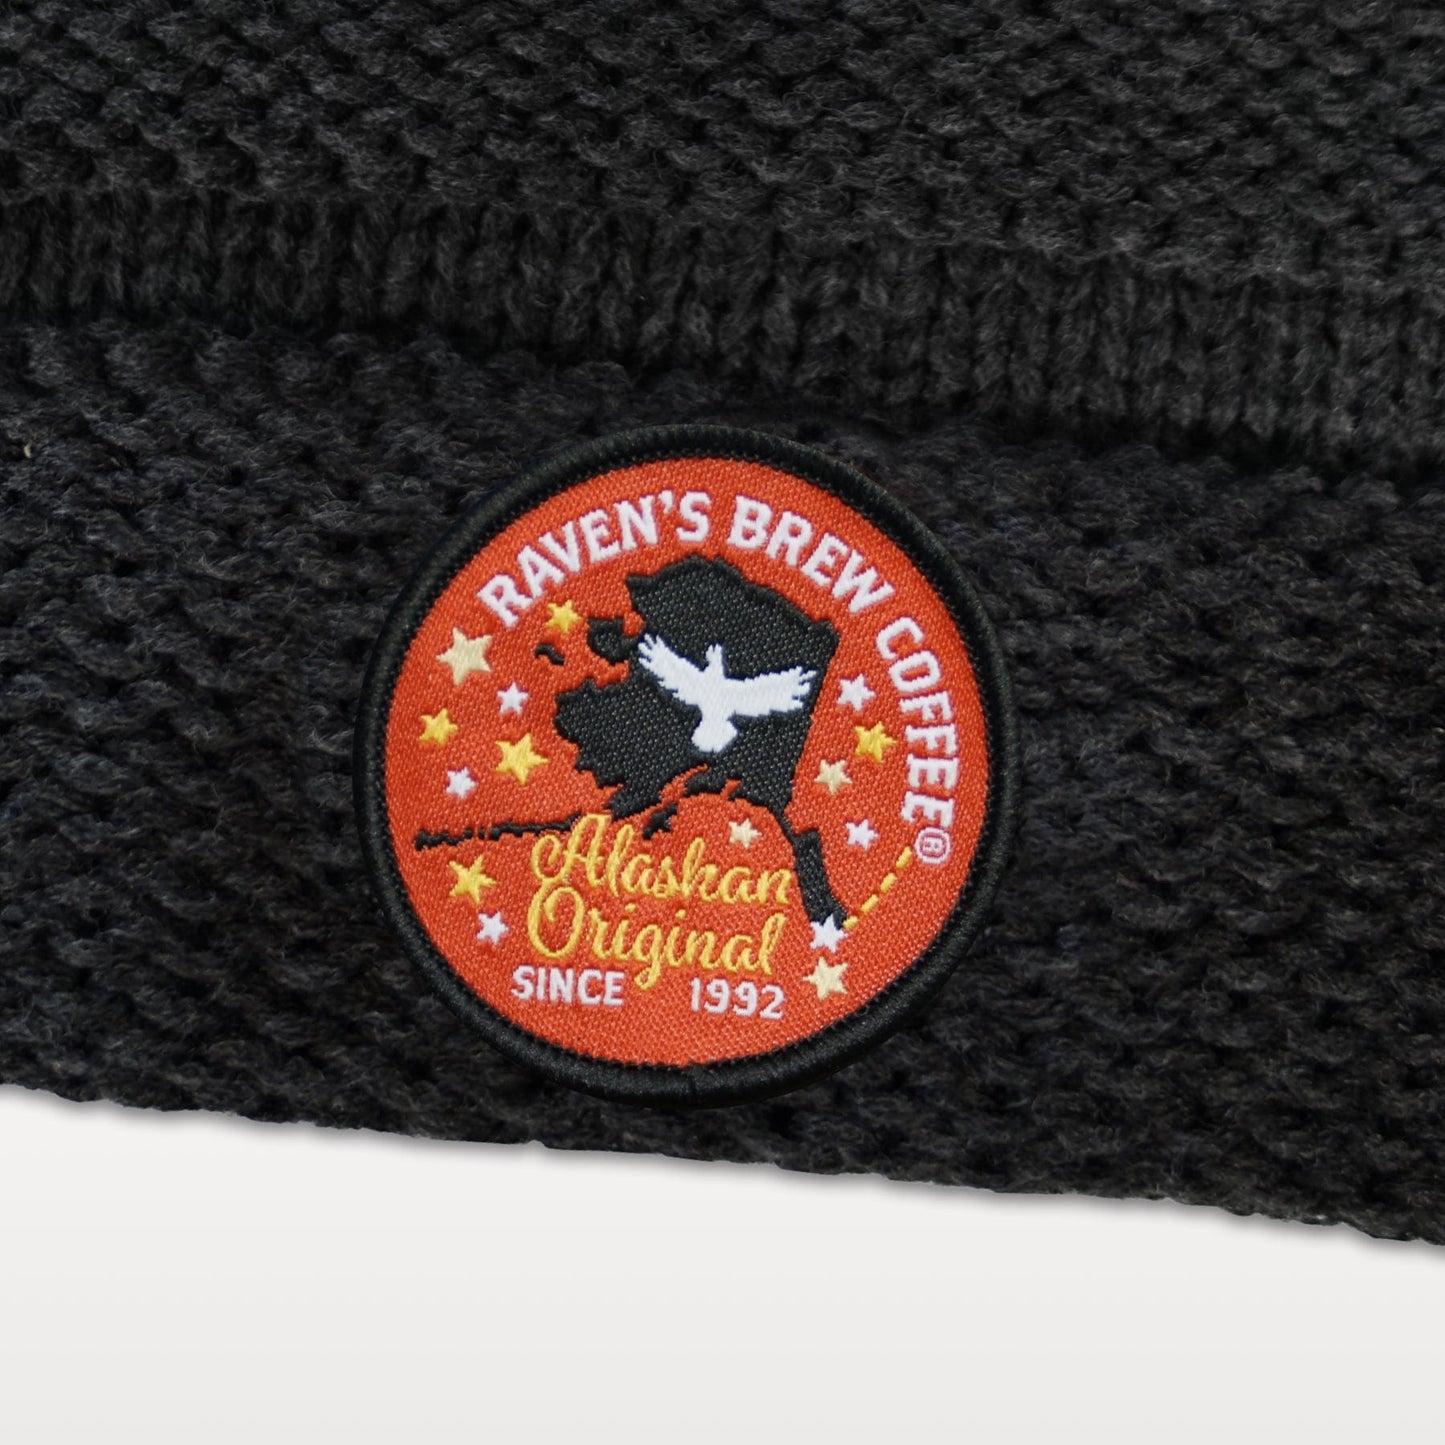 Close up of the round Raven's Brew Coffee embroidered patch featuring a raven, stars and a silhouette of Alaska with the words "Alaskan Original Since 1992" emblazoned at the bottom.